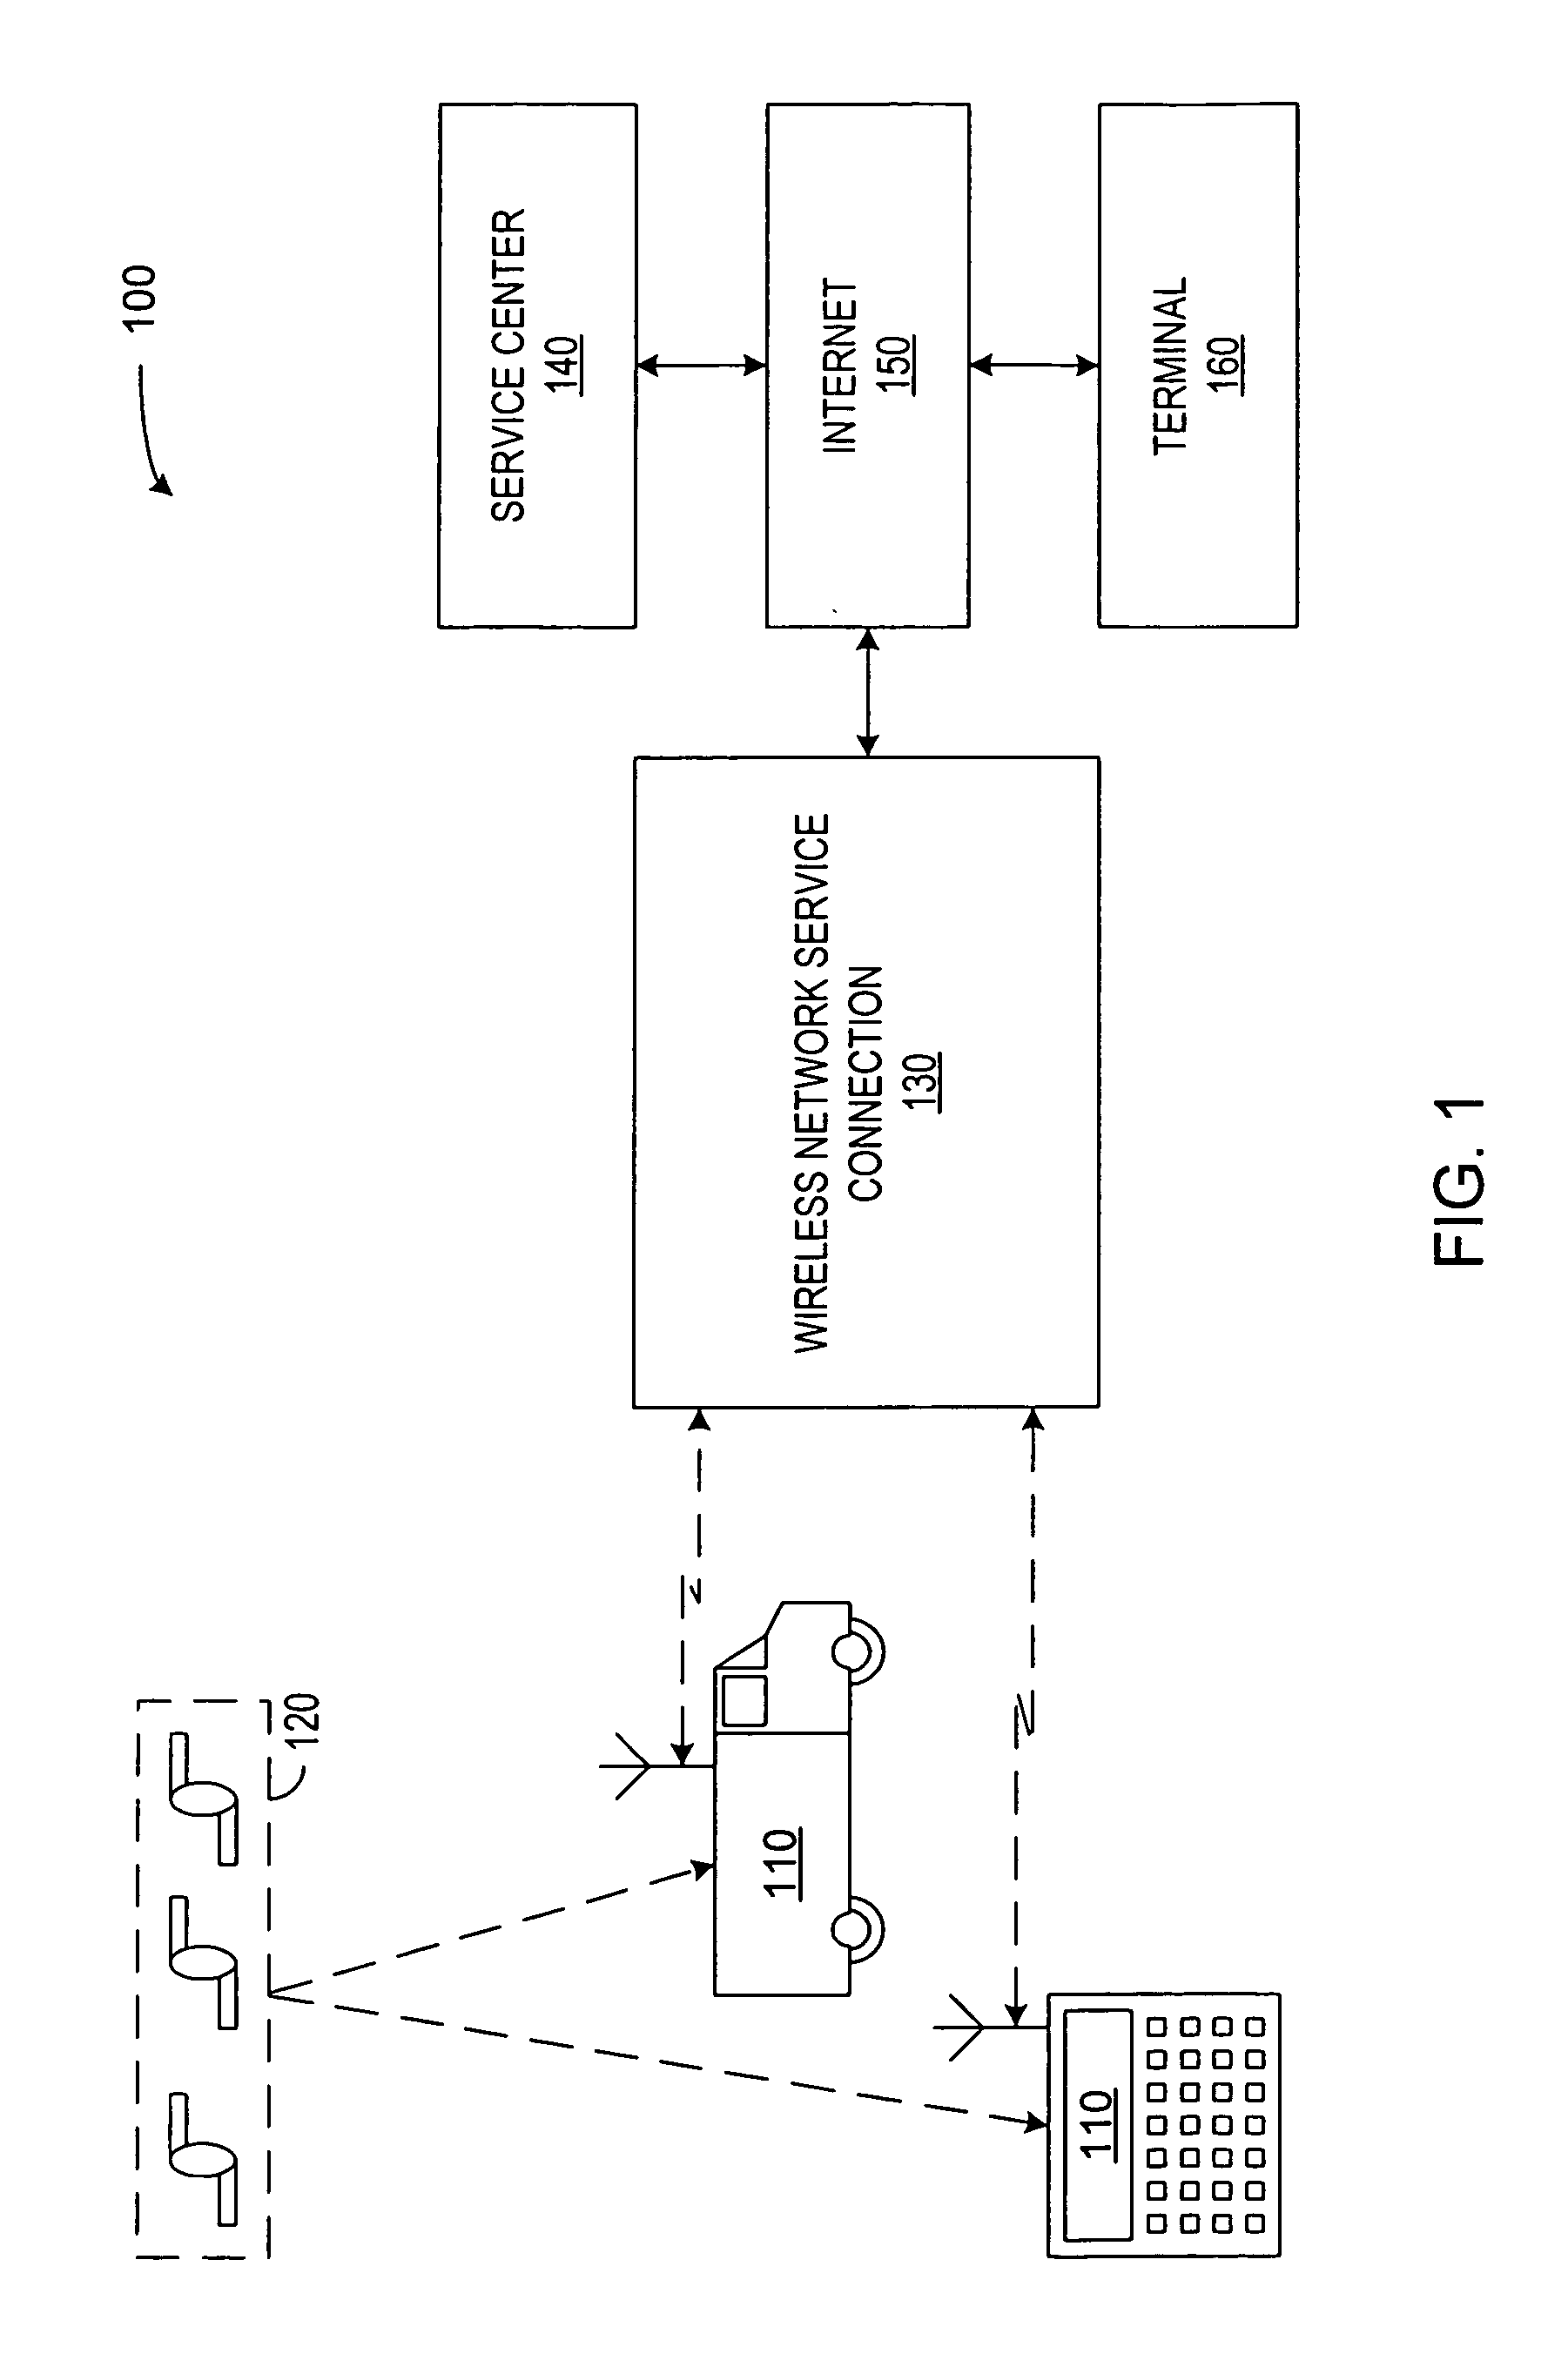 Targeted impending arrival notification of a wirelessly connected location device